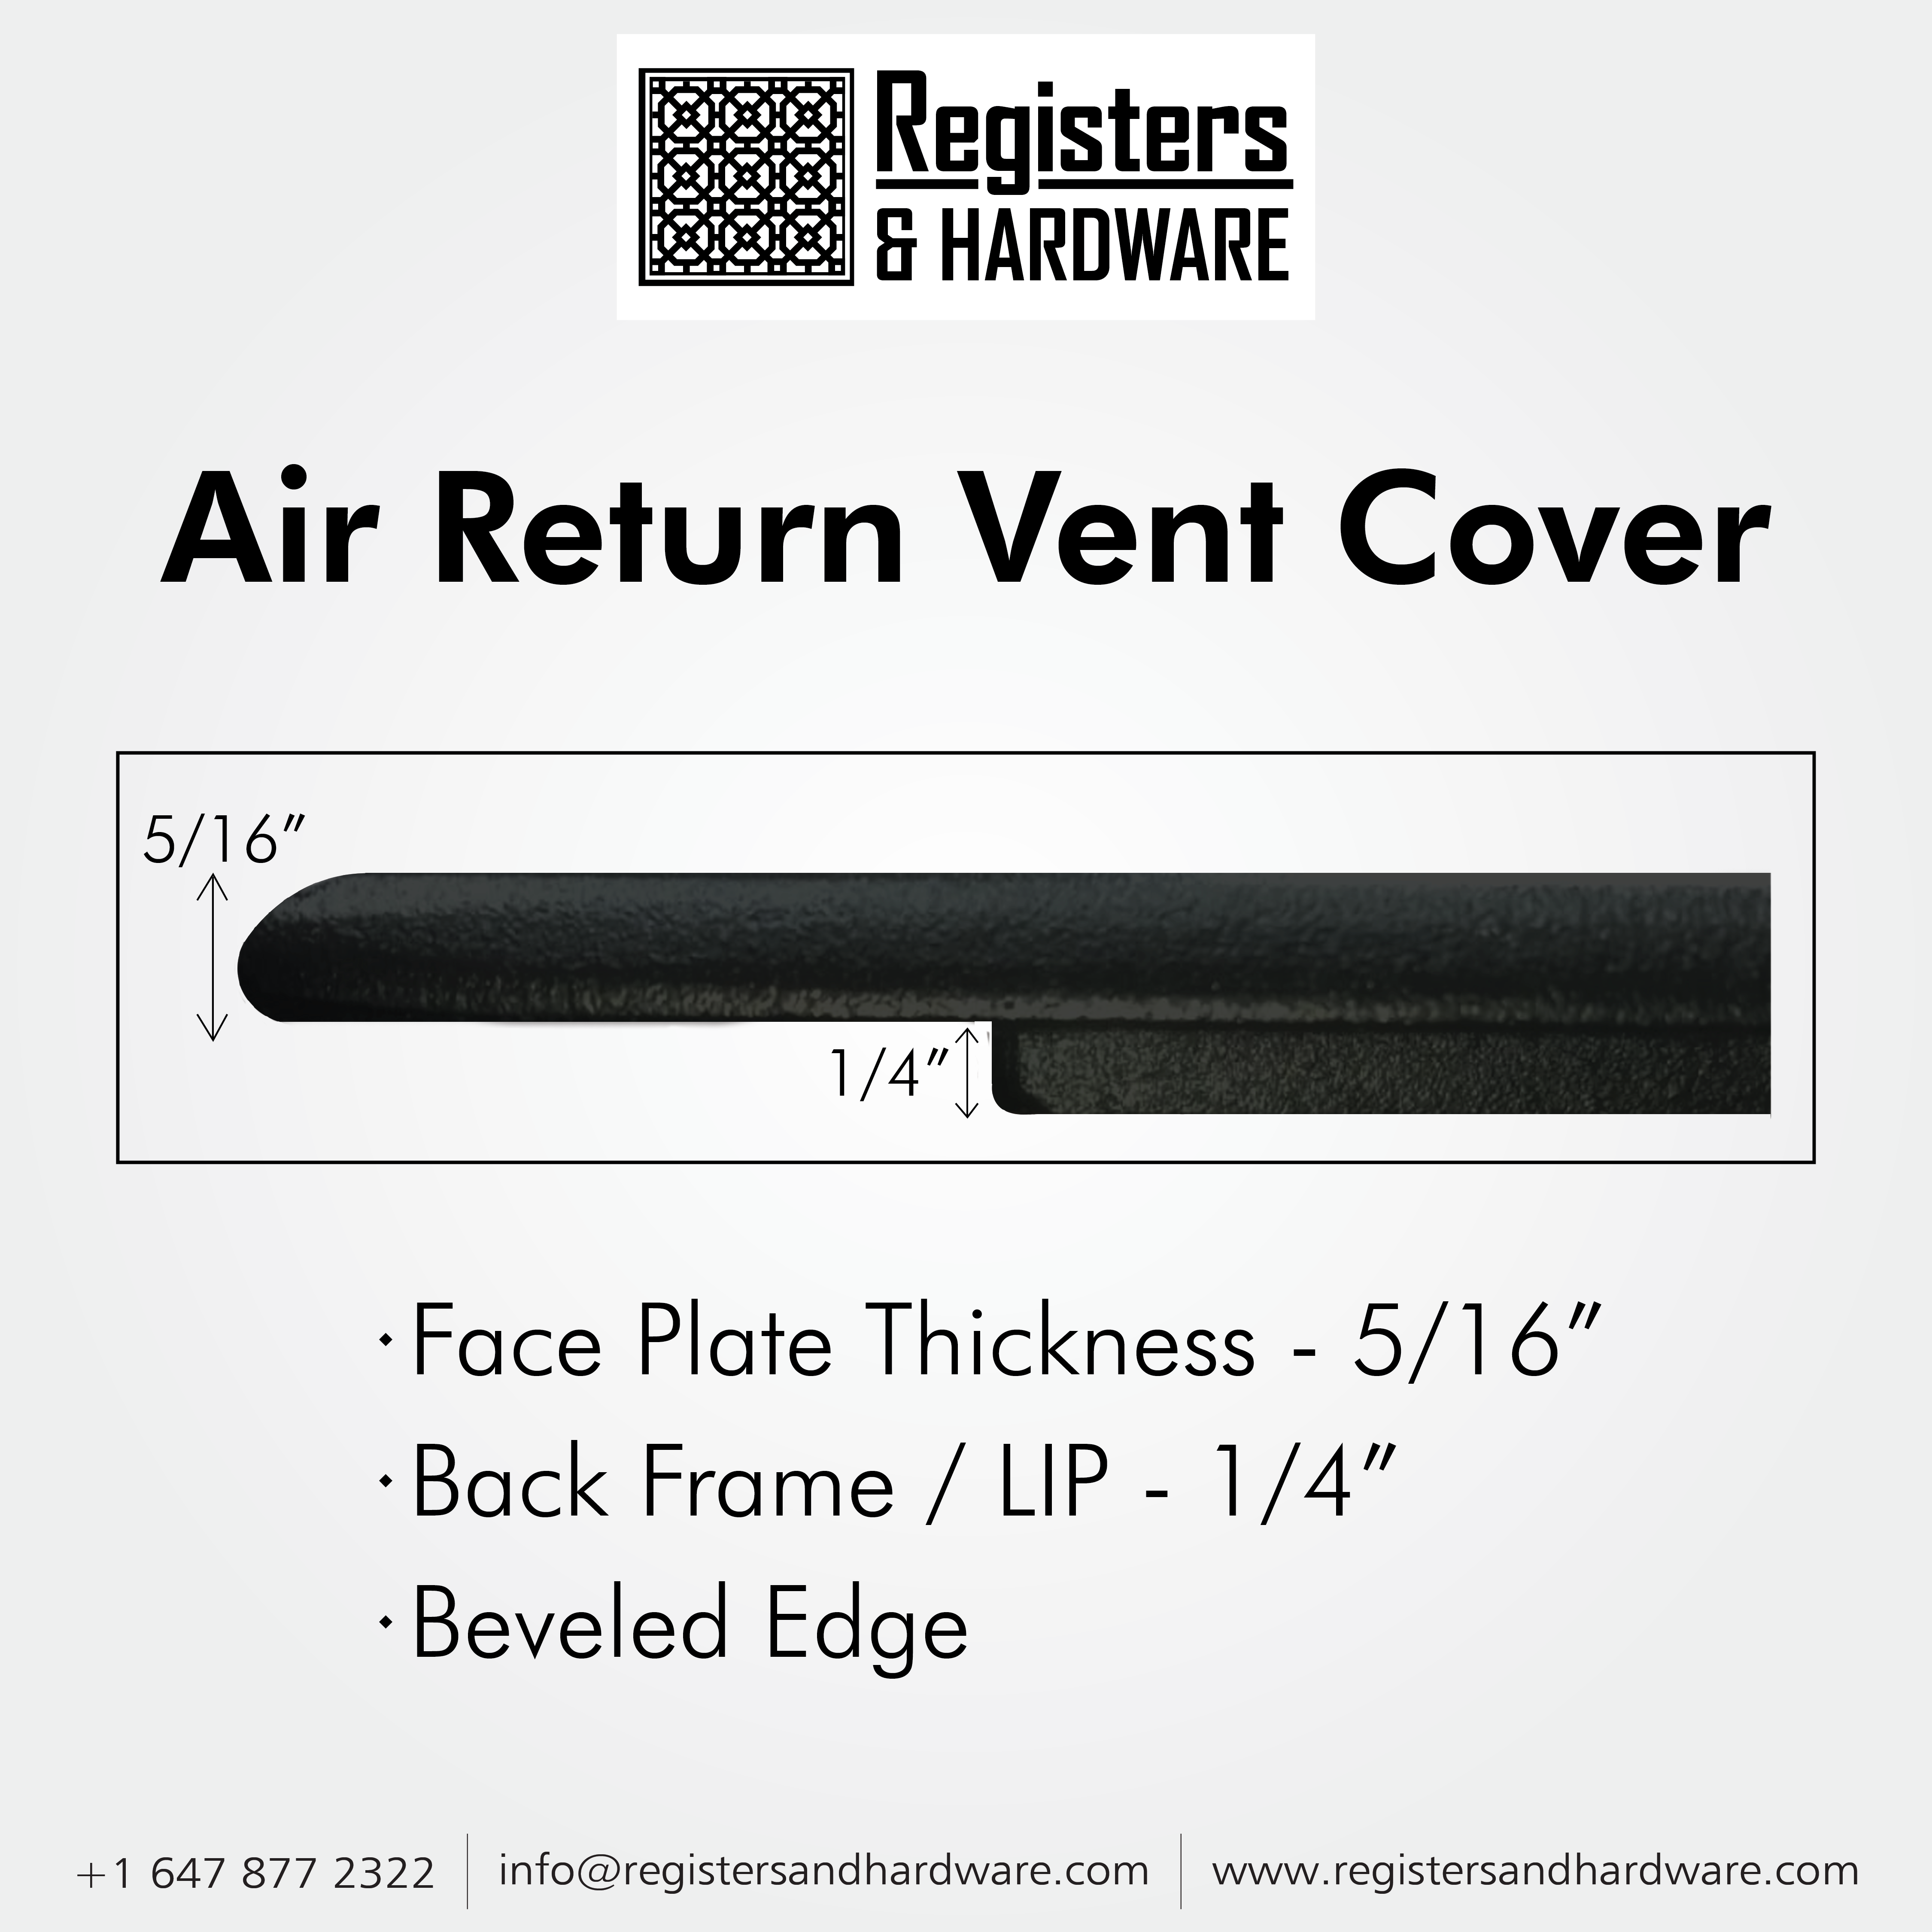 Achtek AIR RETURN 6"x20" Duct Opening (Overall Size 8"x22") | Heavy Cast Aluminum Air Grille HVAC Duct || Powder Coated